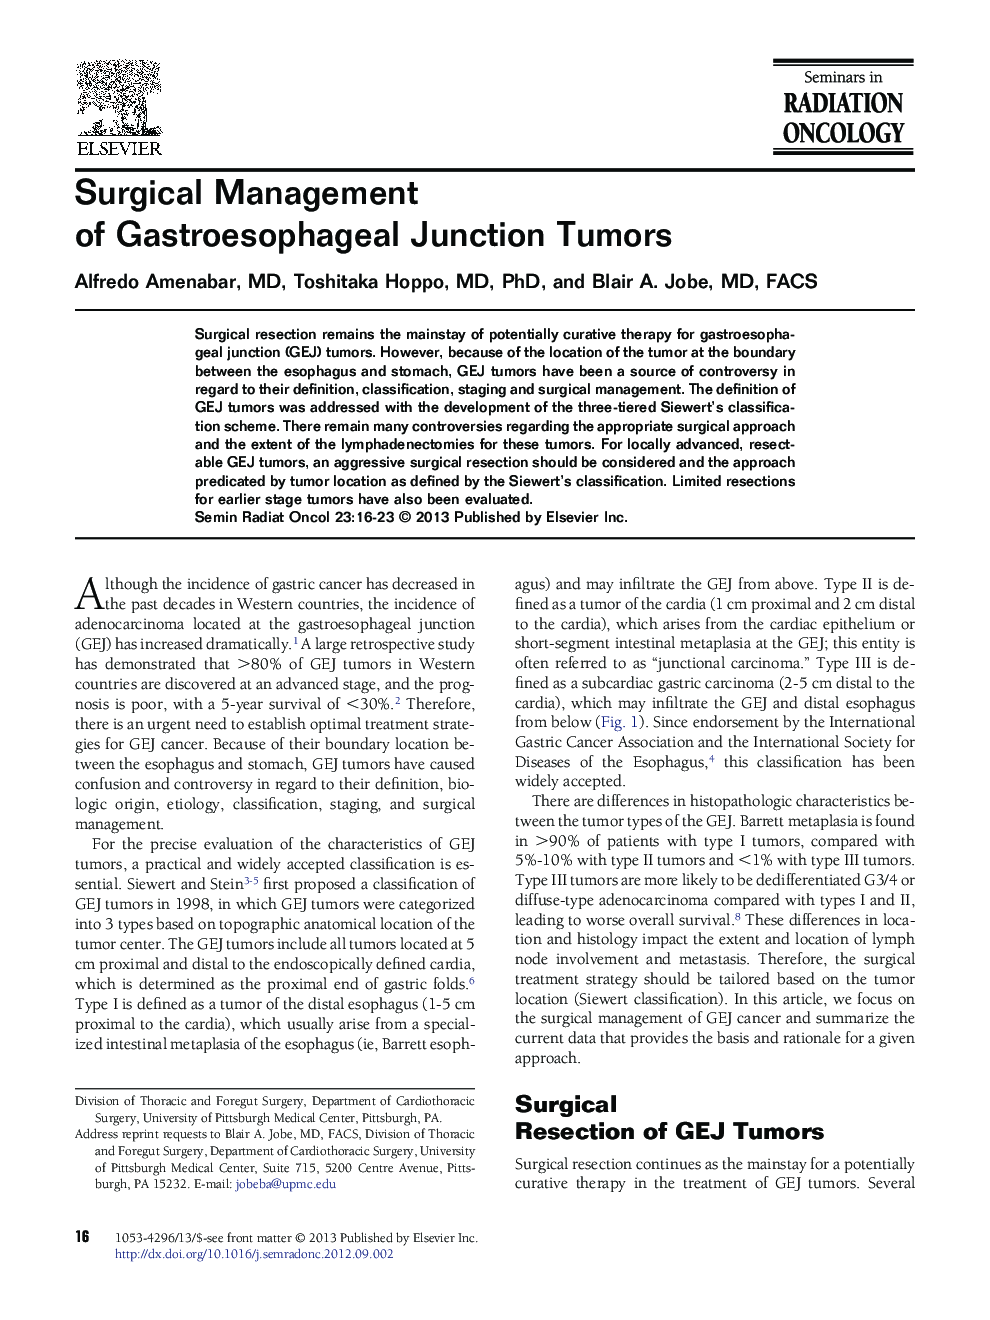 Surgical Management of Gastroesophageal Junction Tumors